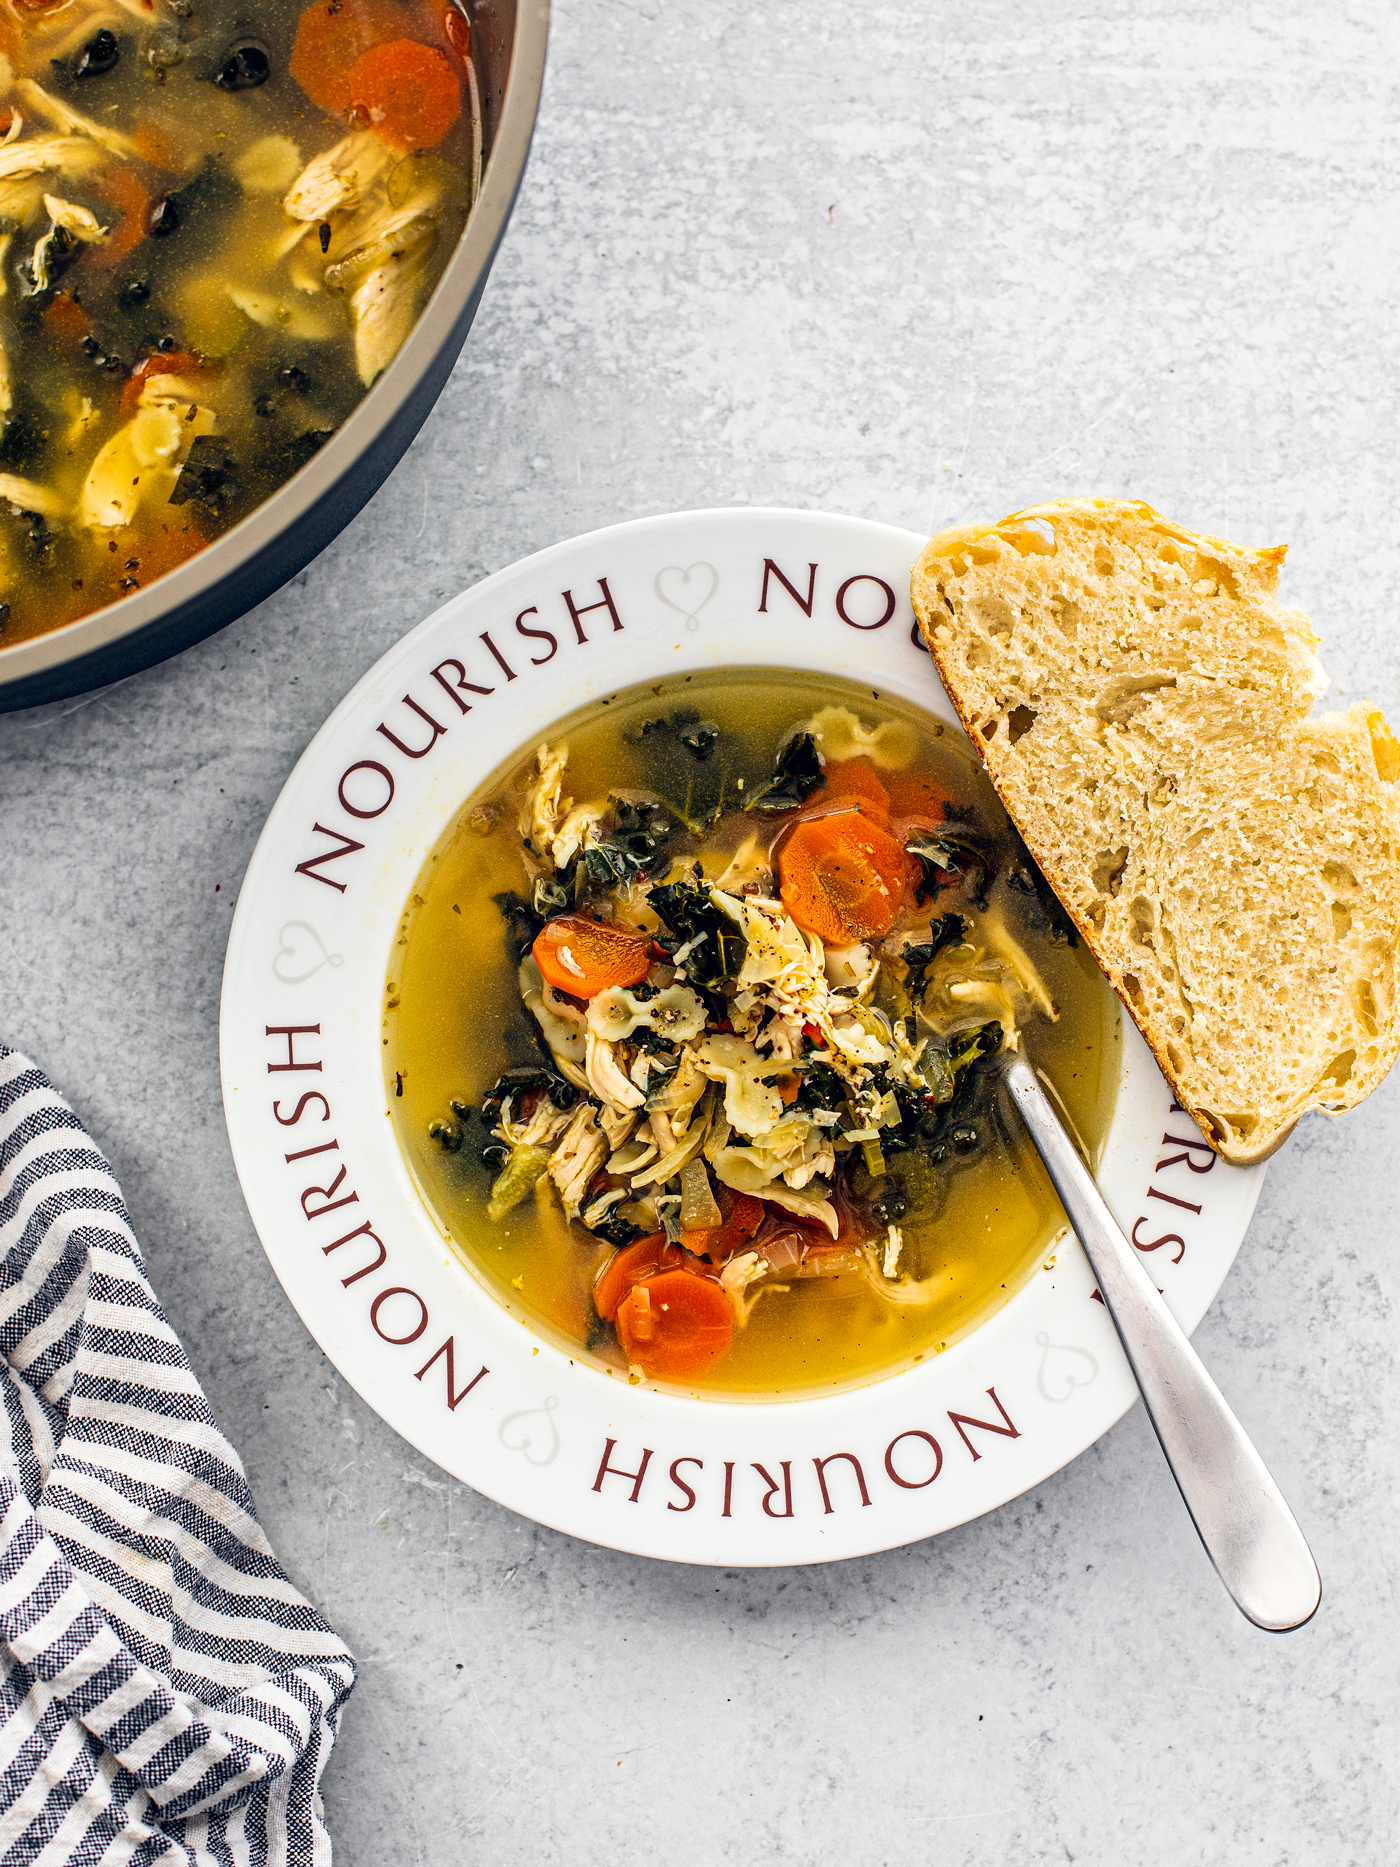 Soup bowl with the word "Nourish" written around it, filled with chicken soup next to a dish towel and pot of soup.